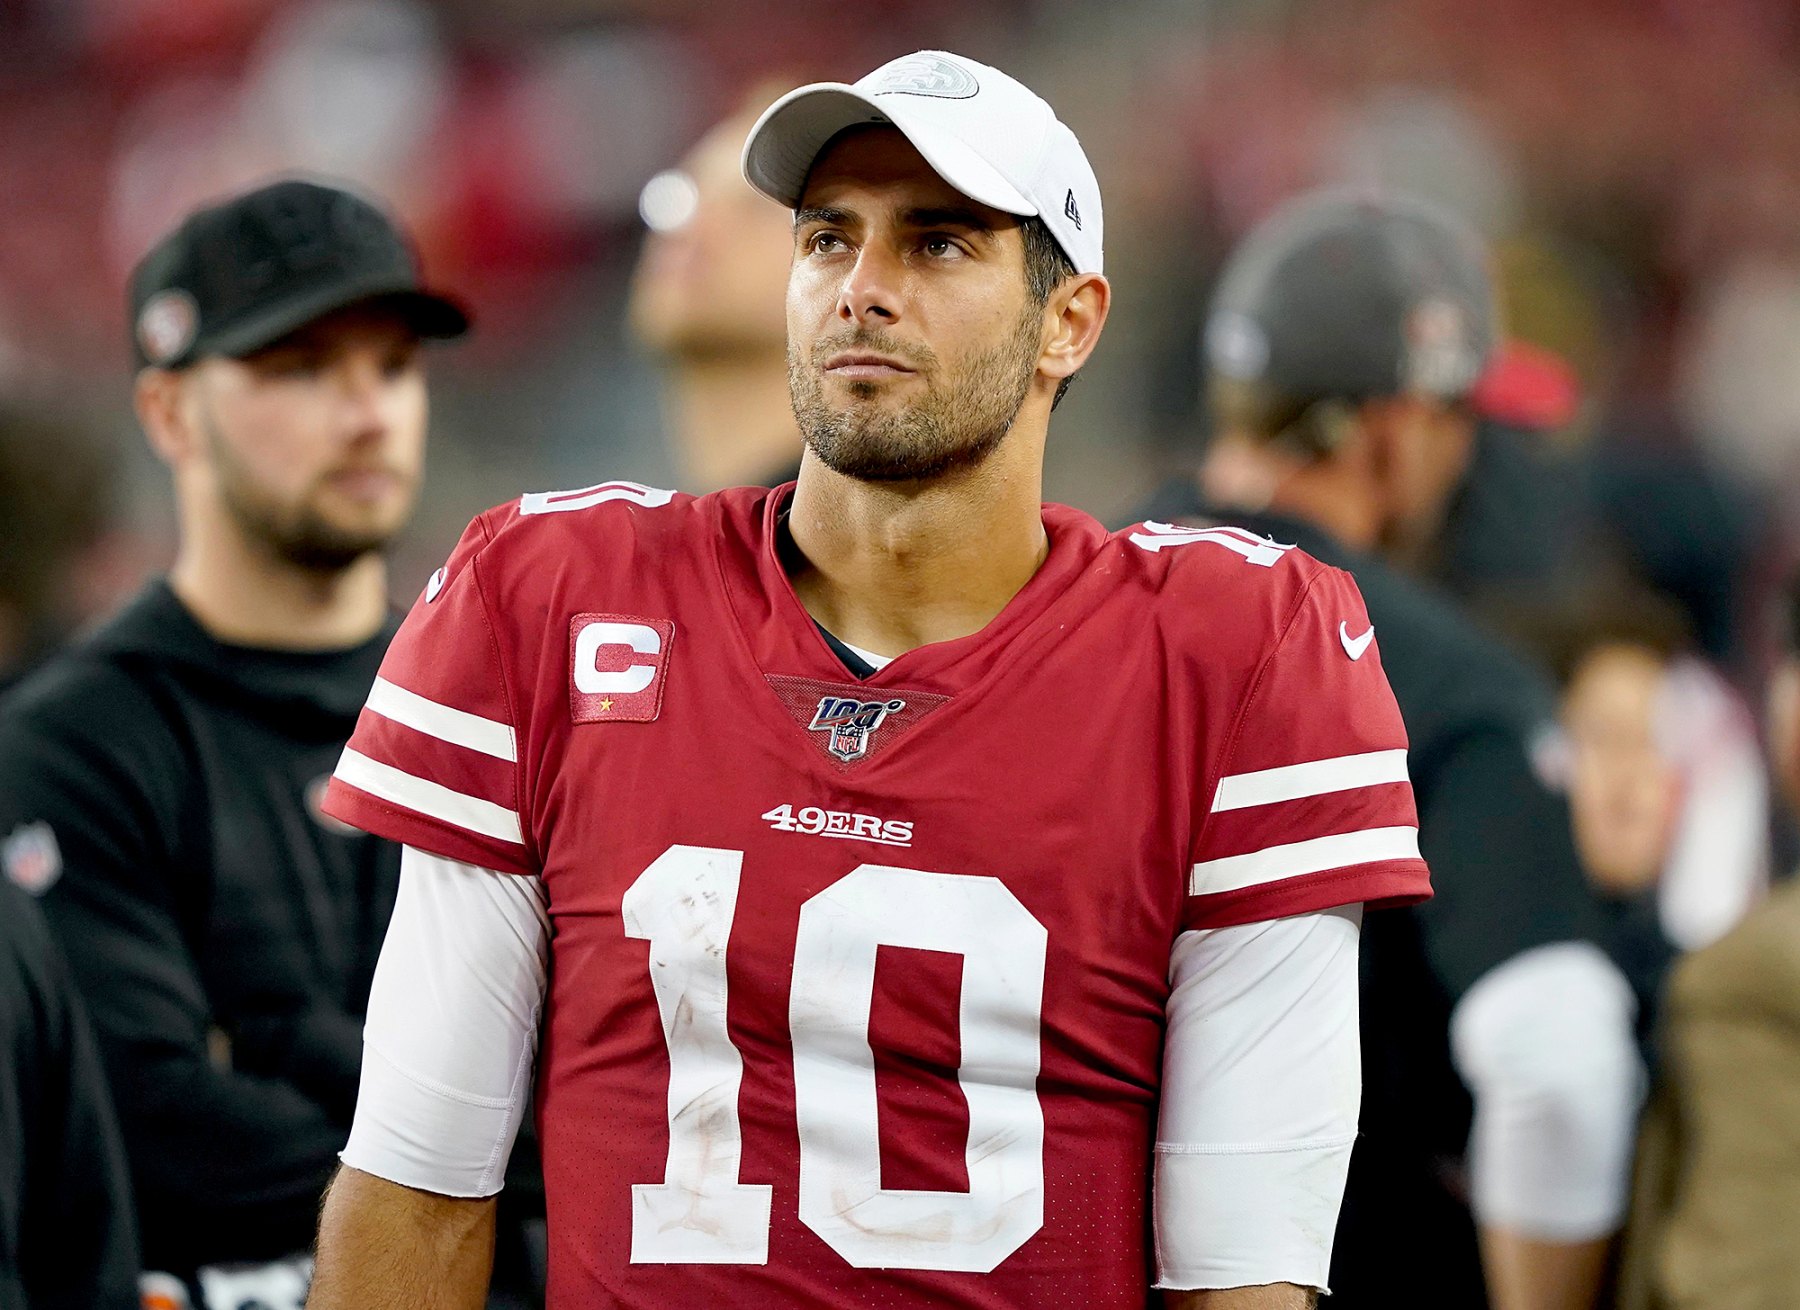 Jimmy Garoppolo Is Single: What We Know His Love Life